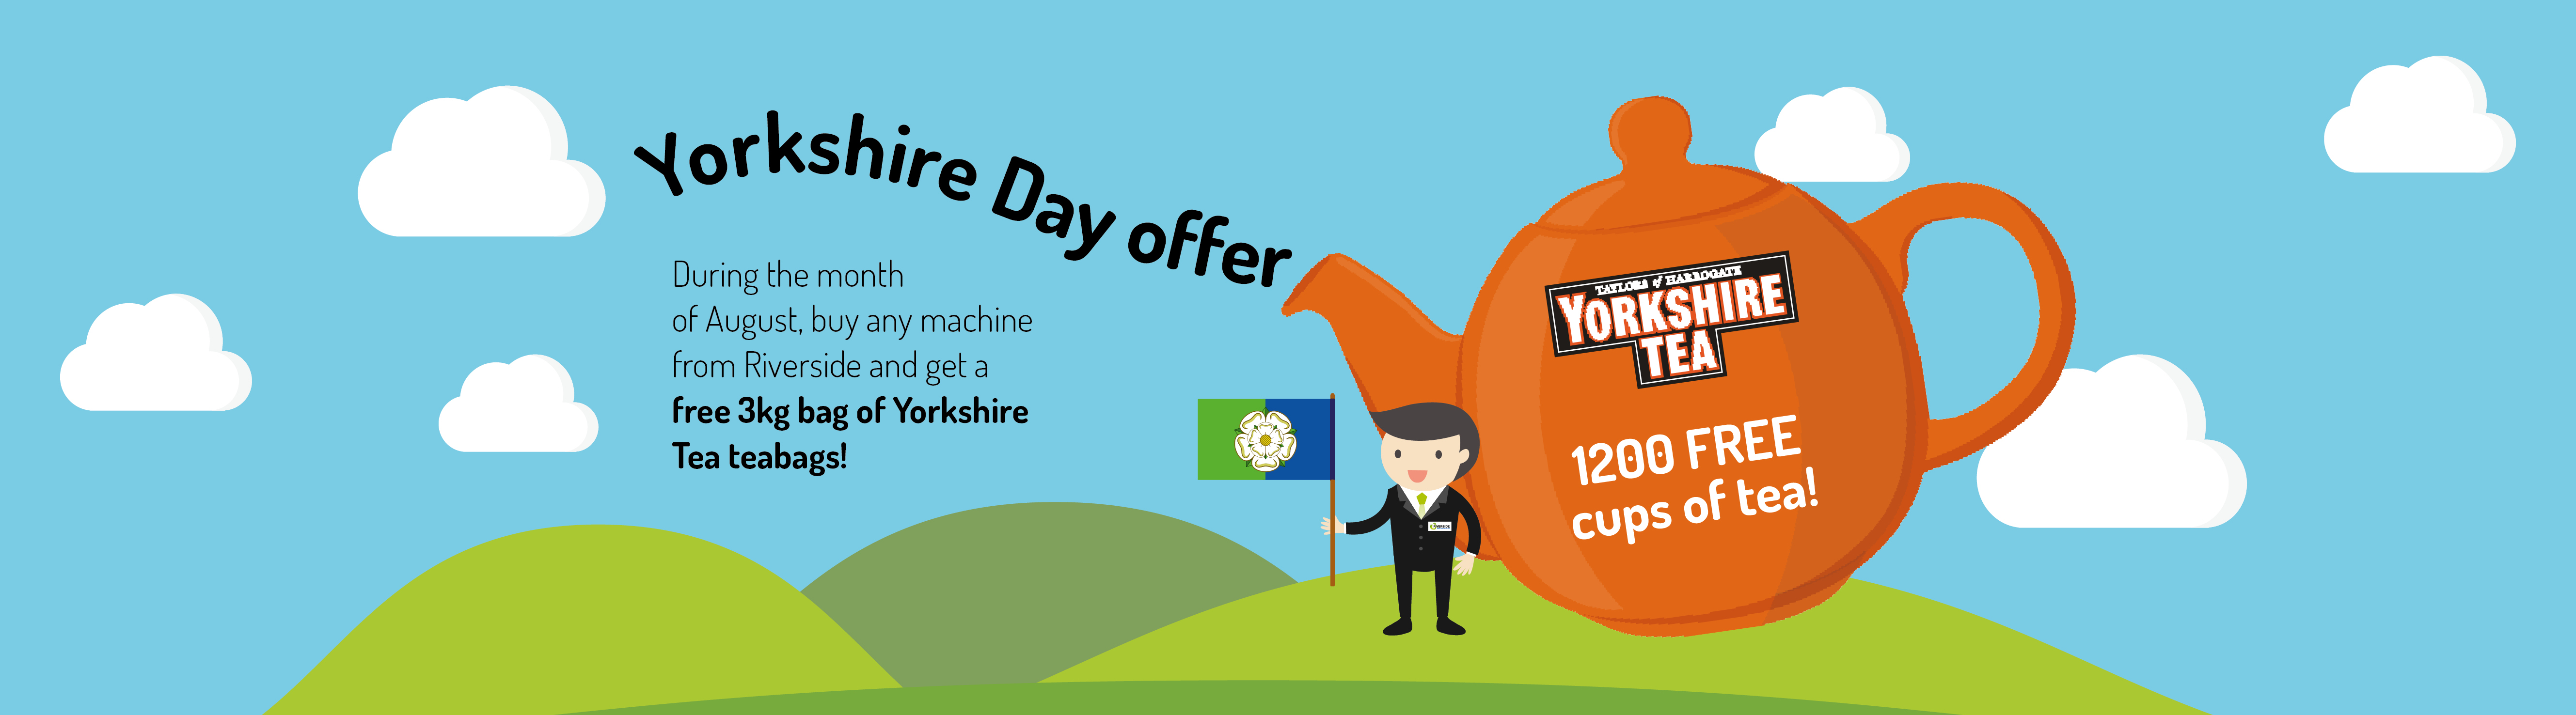 Fancy a brew? Free Yorkshire Tea on offer during August!